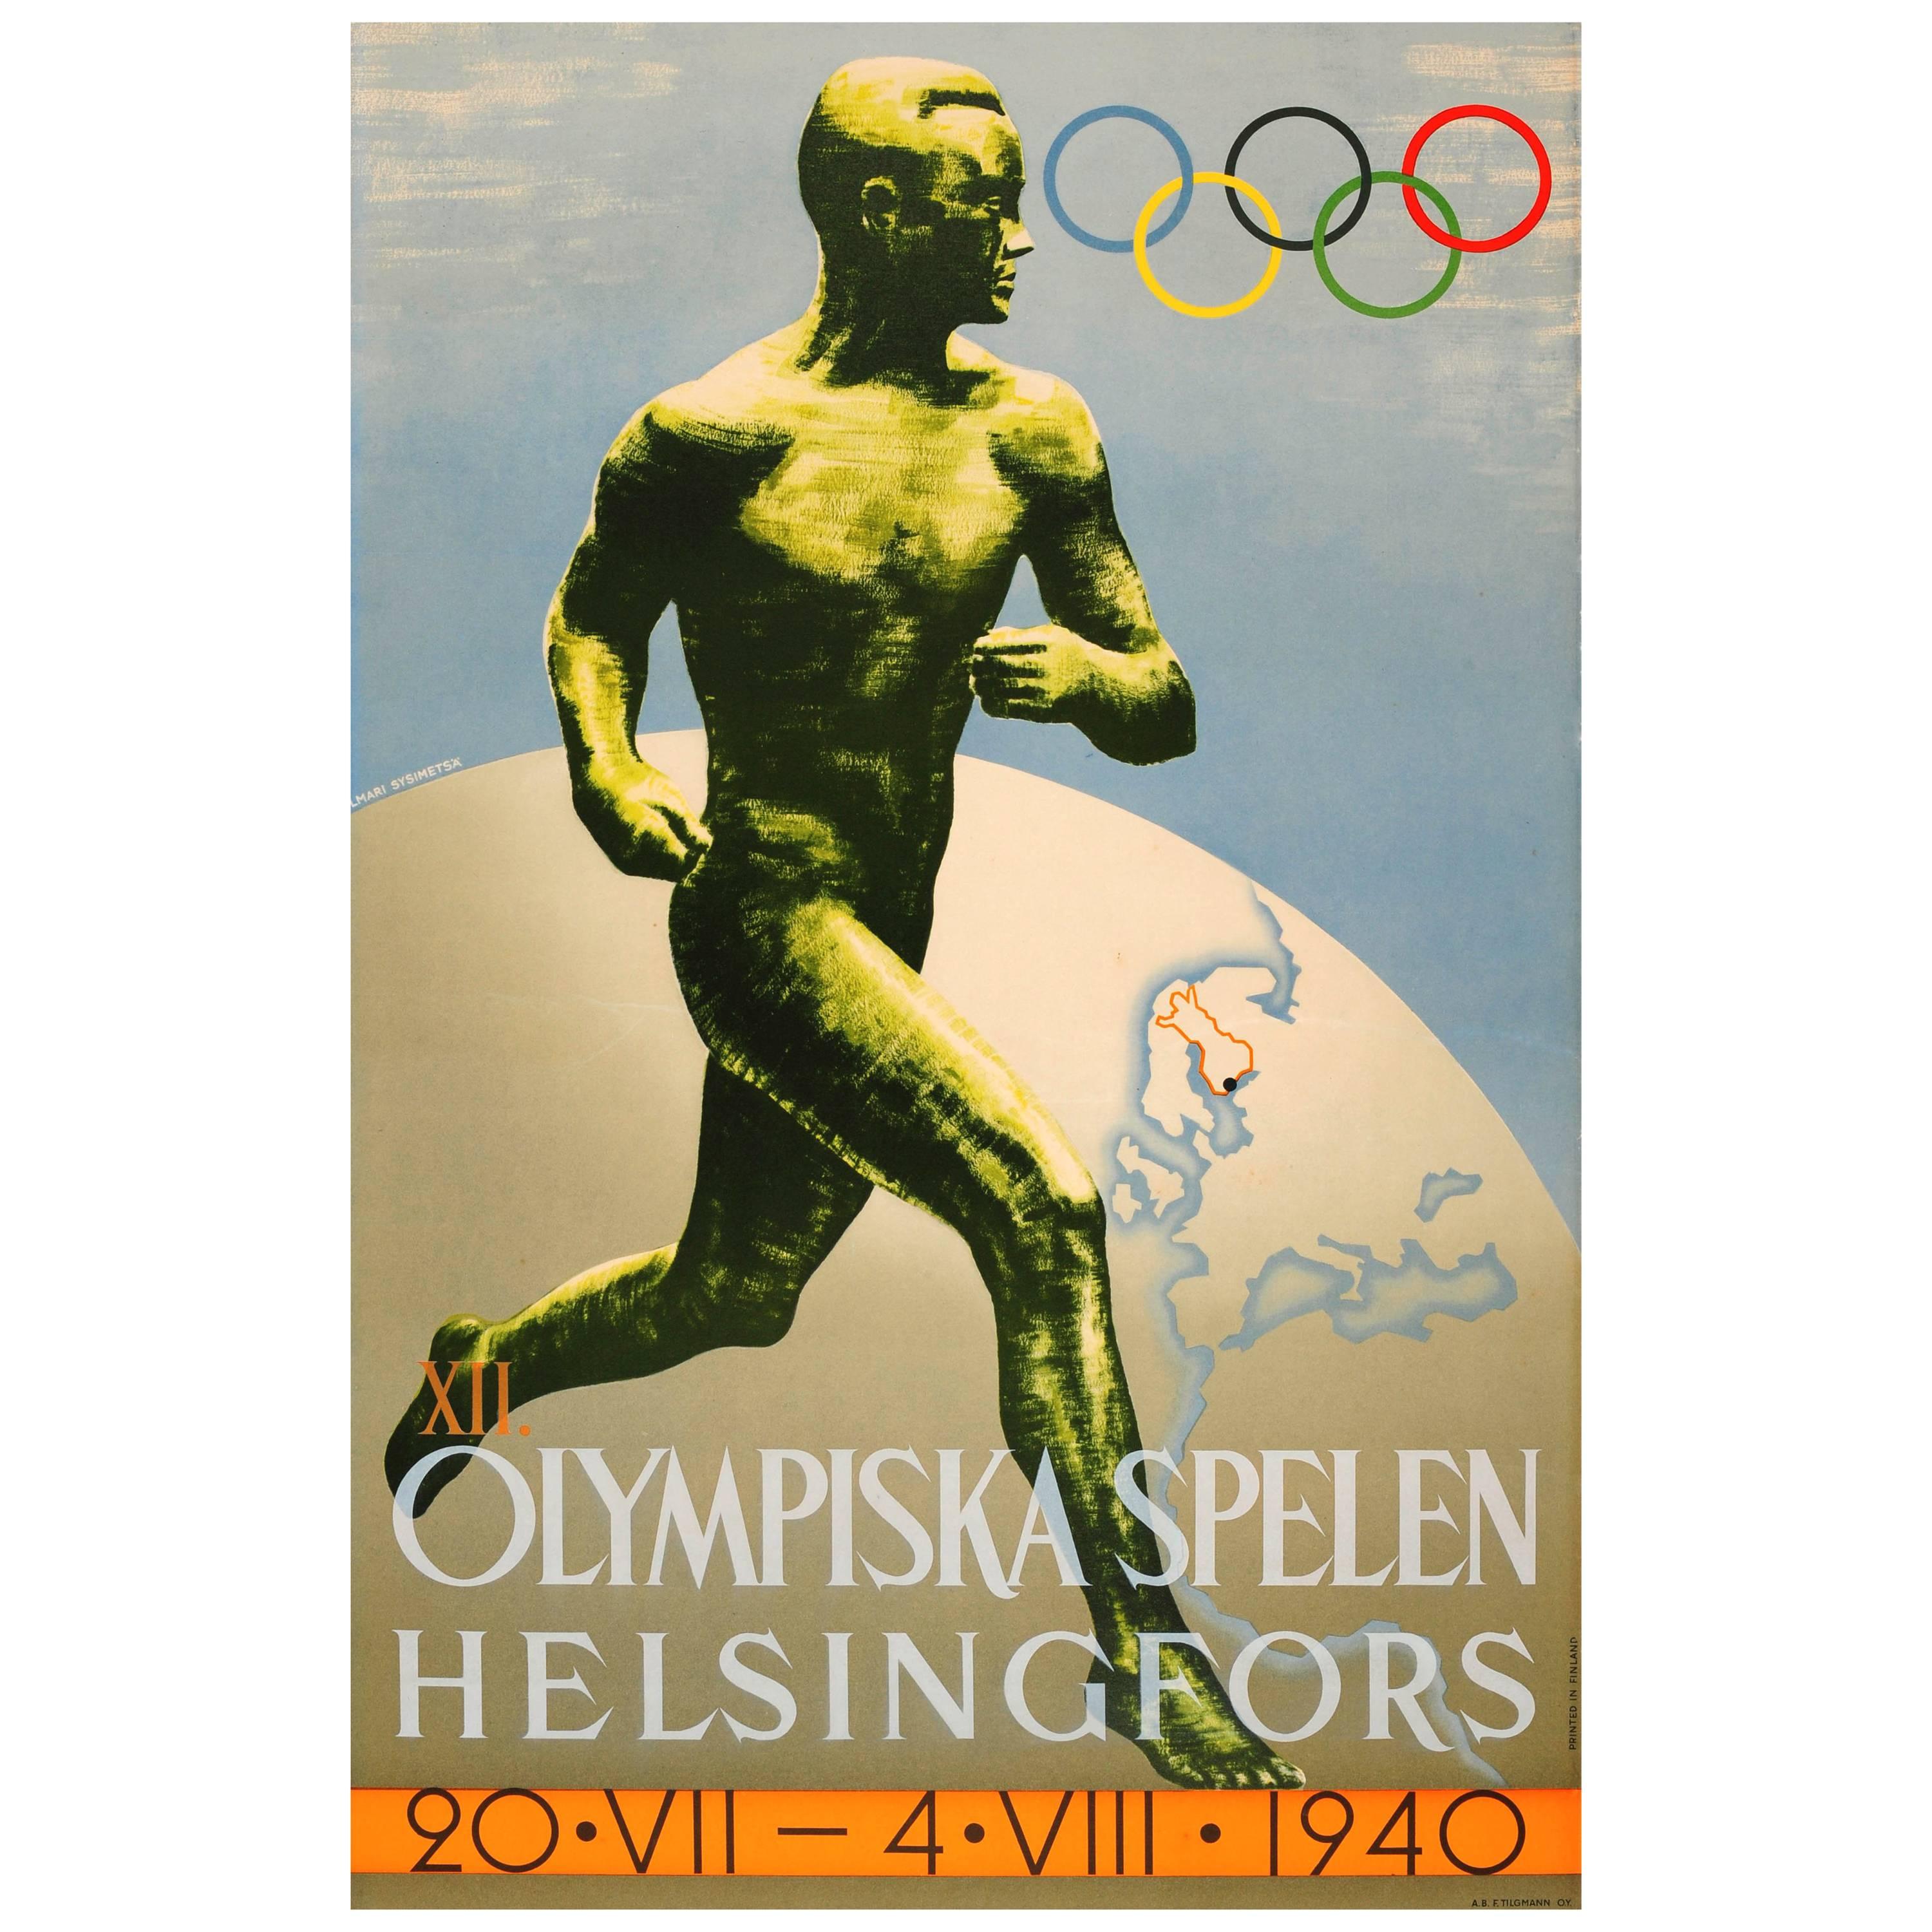 Original Vintage Olympics Sport Poster For The 1940 Summer Olympic Games Finland